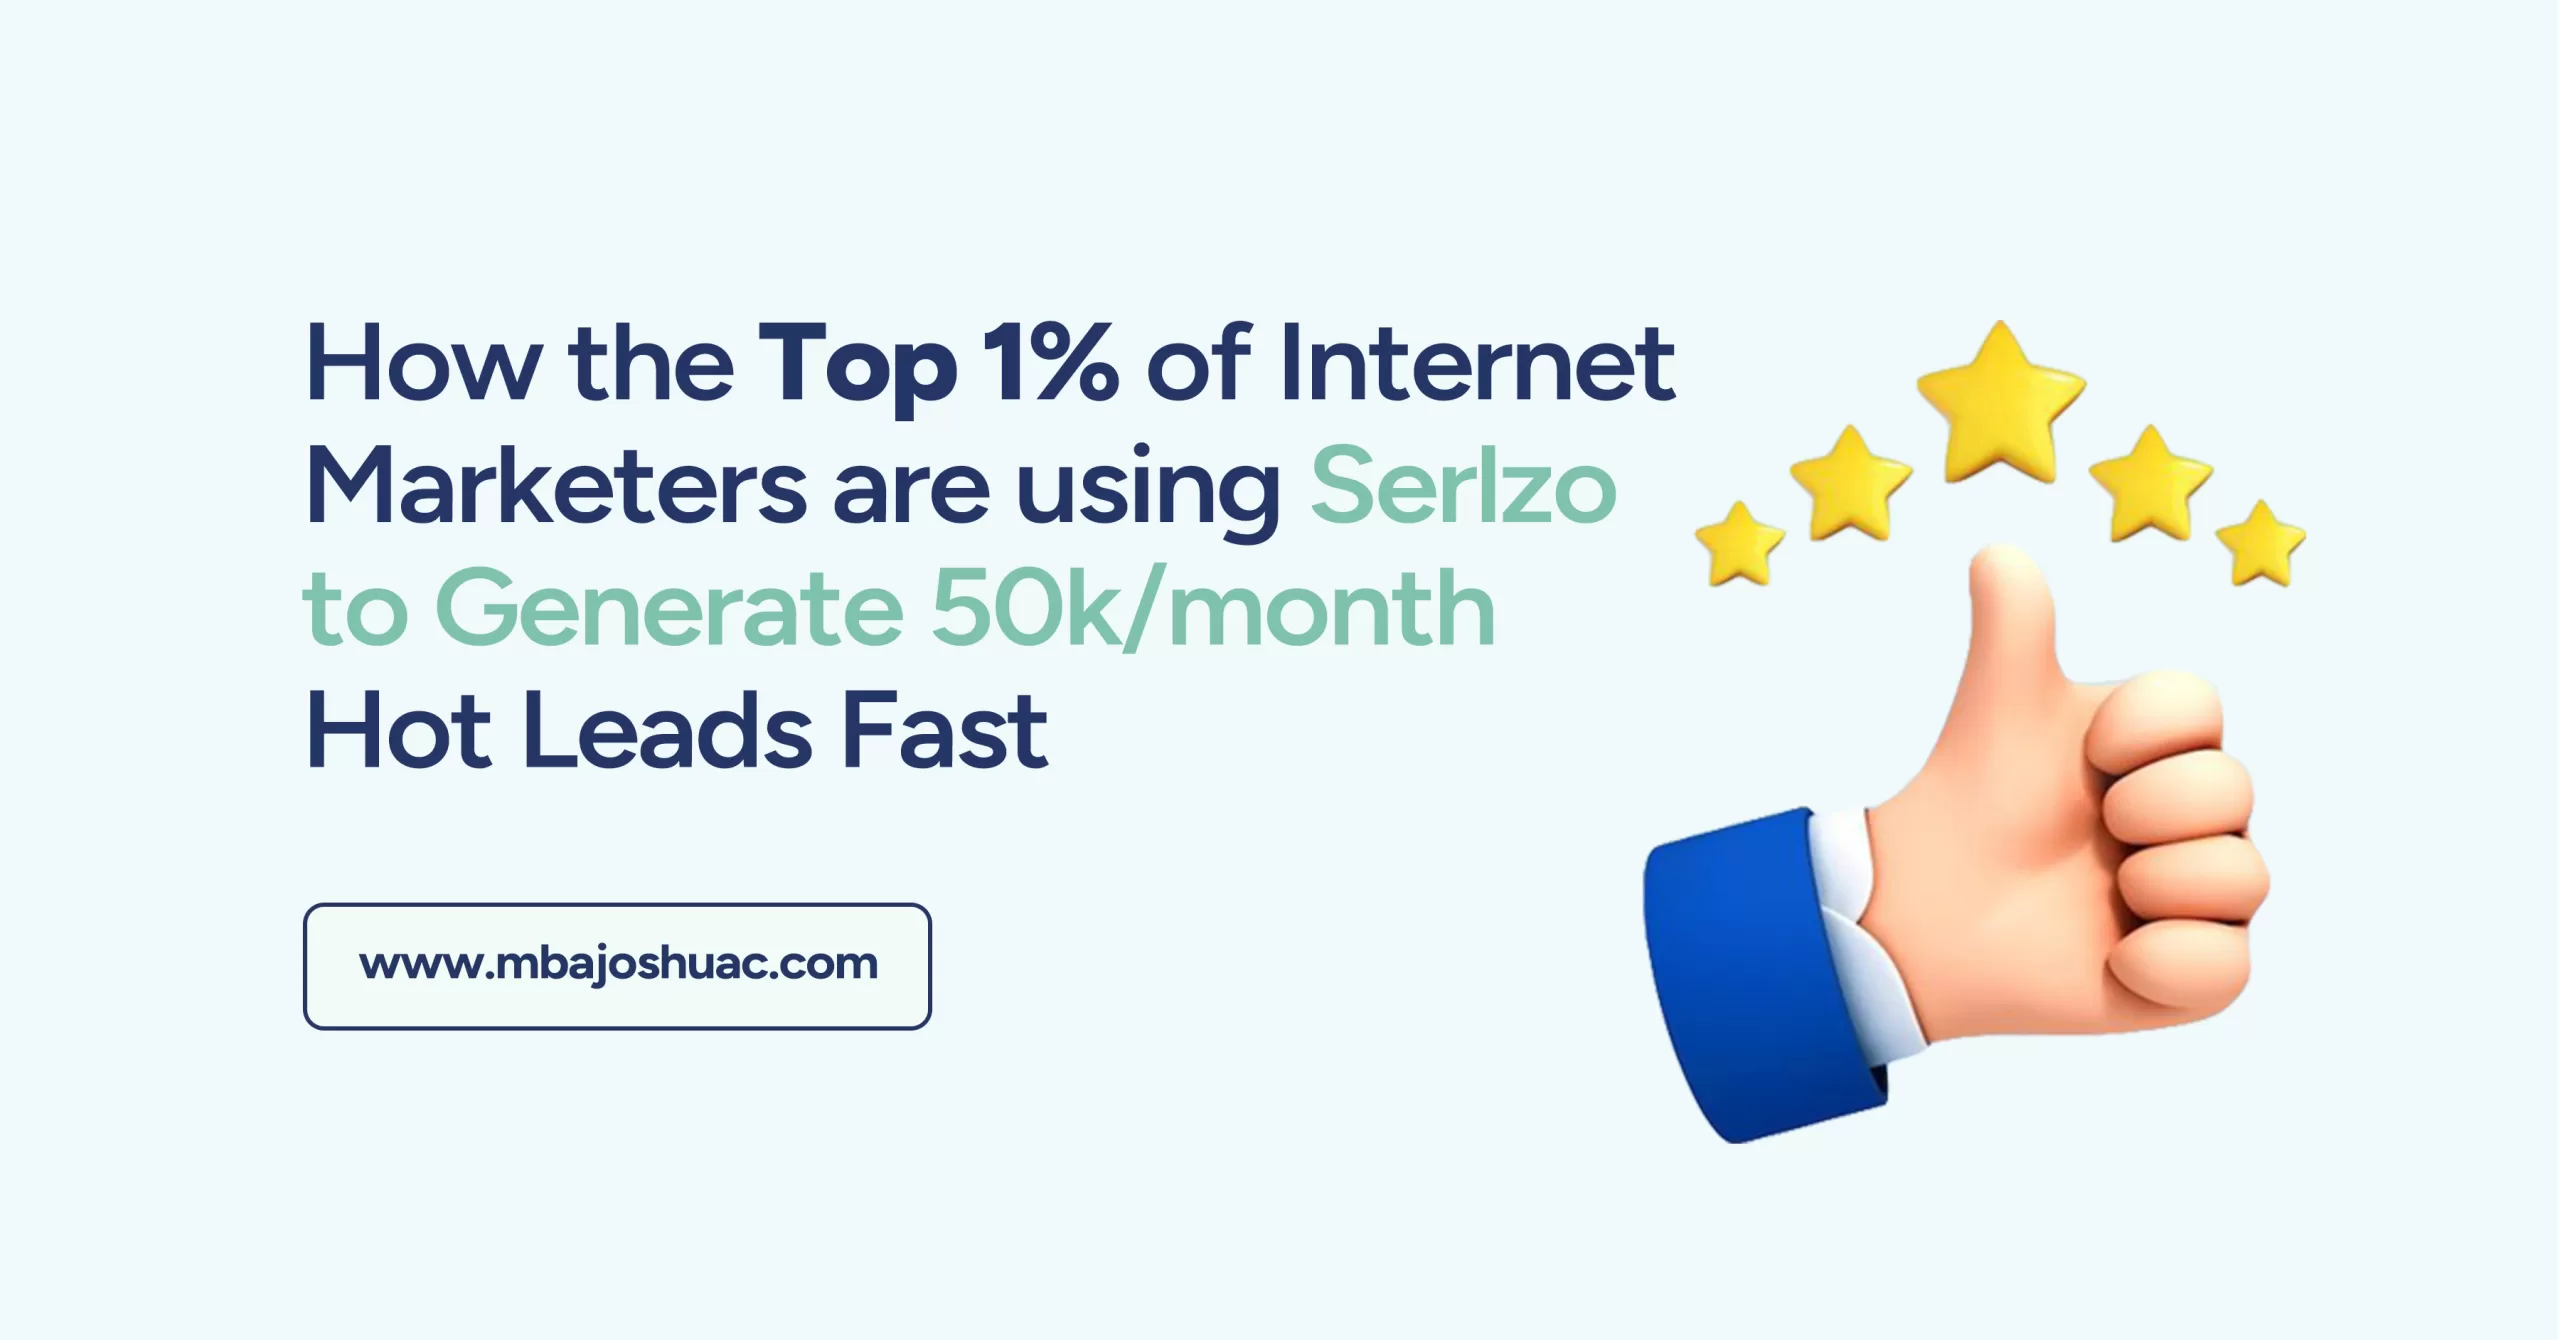 How the Top 1% of Internet Marketers Are Using Serlzo to Generate Leads